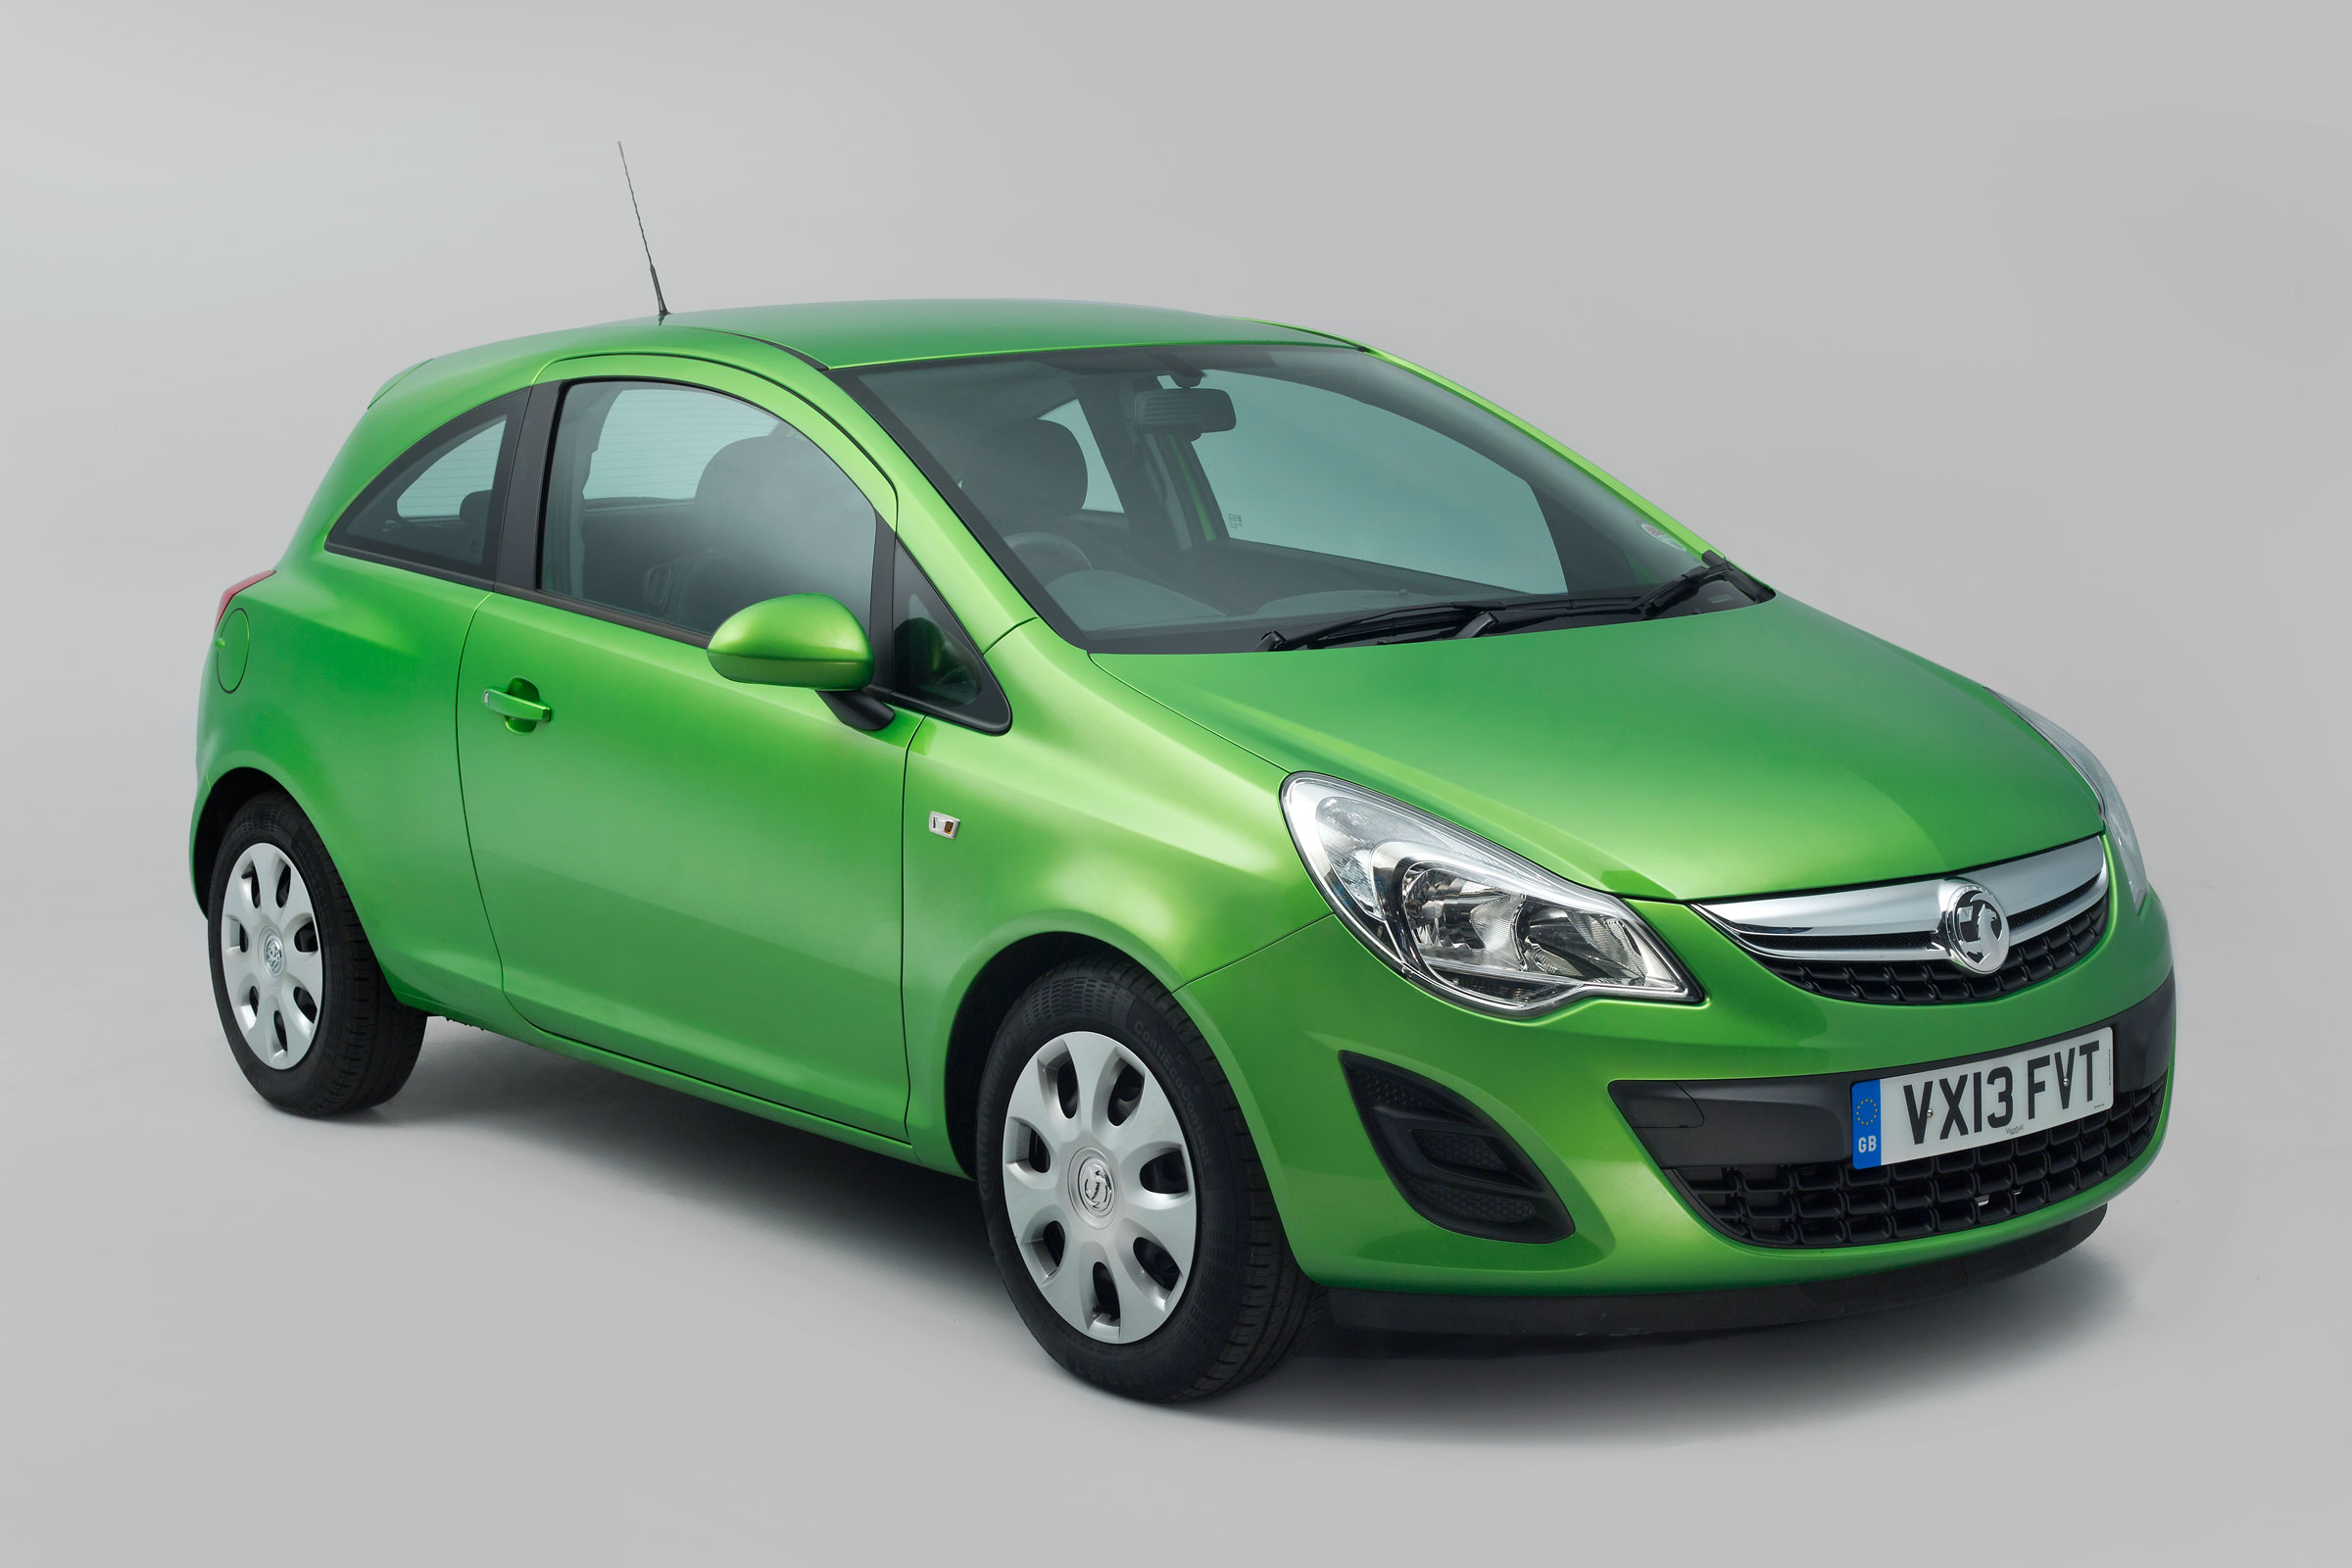 Used Vauxhall Corsa D Buying Guide 06 14 Mk4 Carbuyer